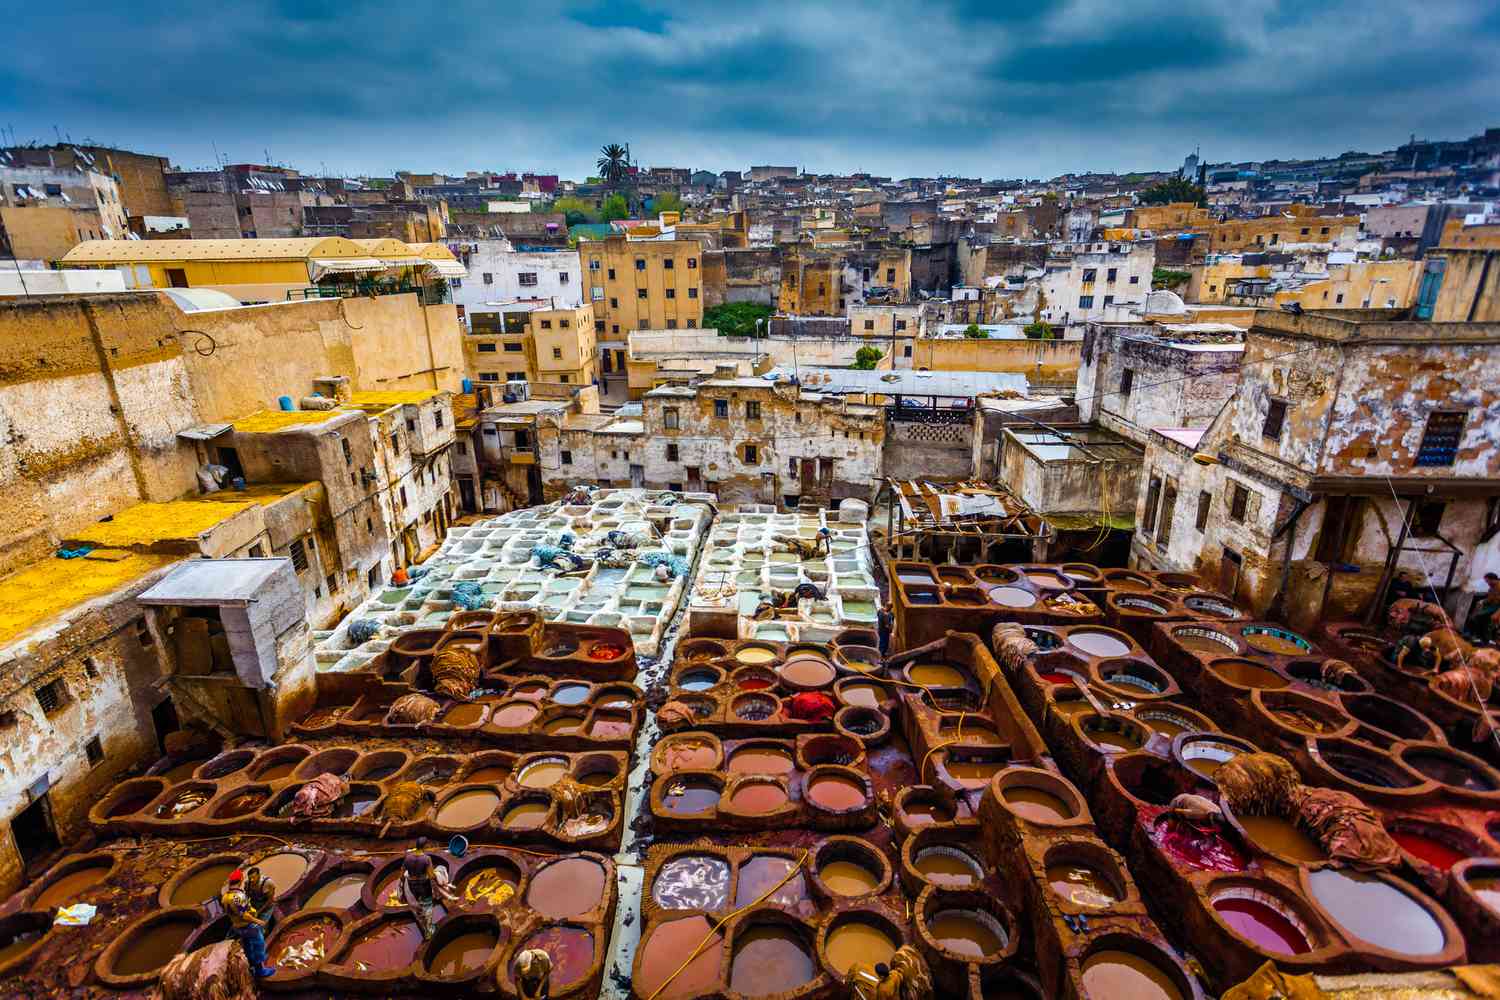 Fez: Morocco Historic City with the World's Oldest Campus